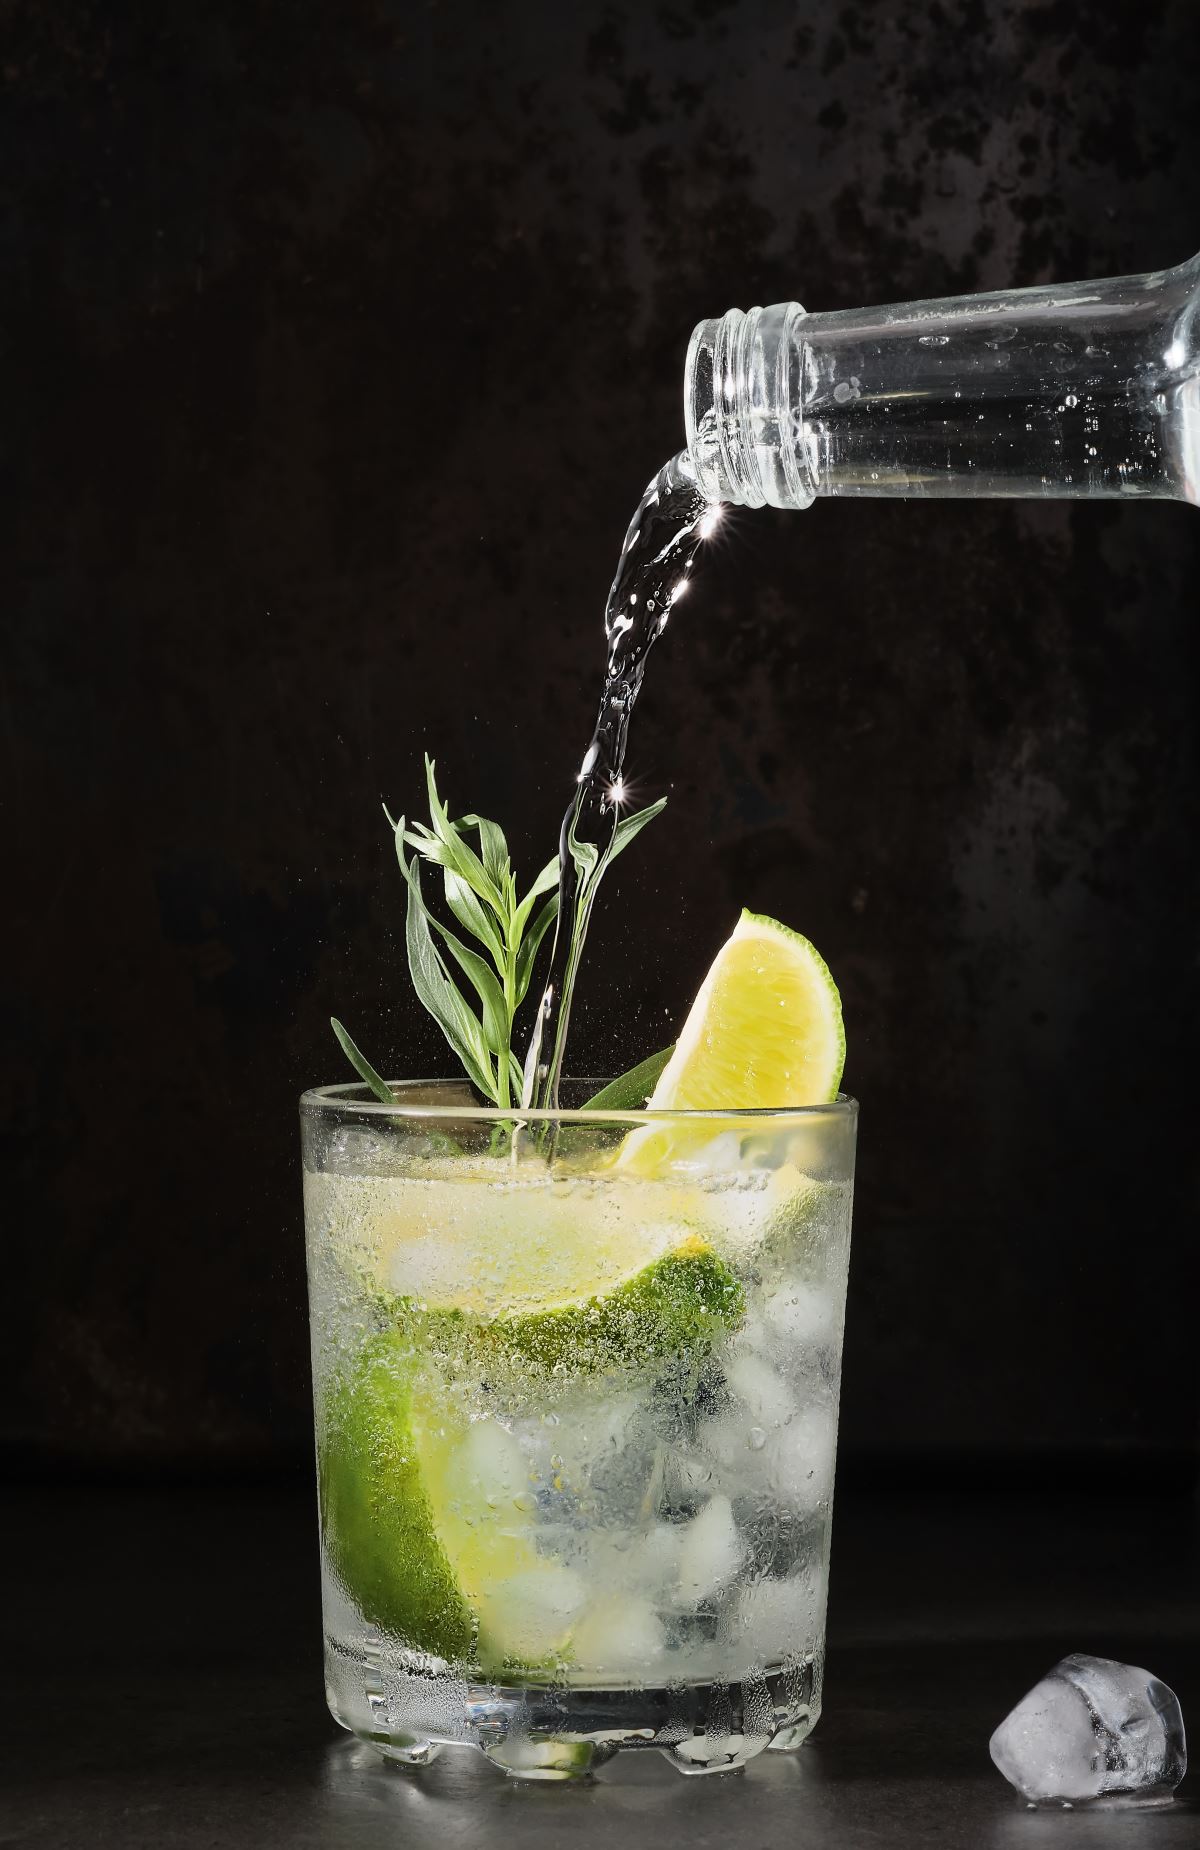 171252393 glass lime lemonade dark table summer drinks pure mineral water is poured into glass vertical frame selective focus homemade drink with lime tarragon ice cubes cold fresh drinks idea